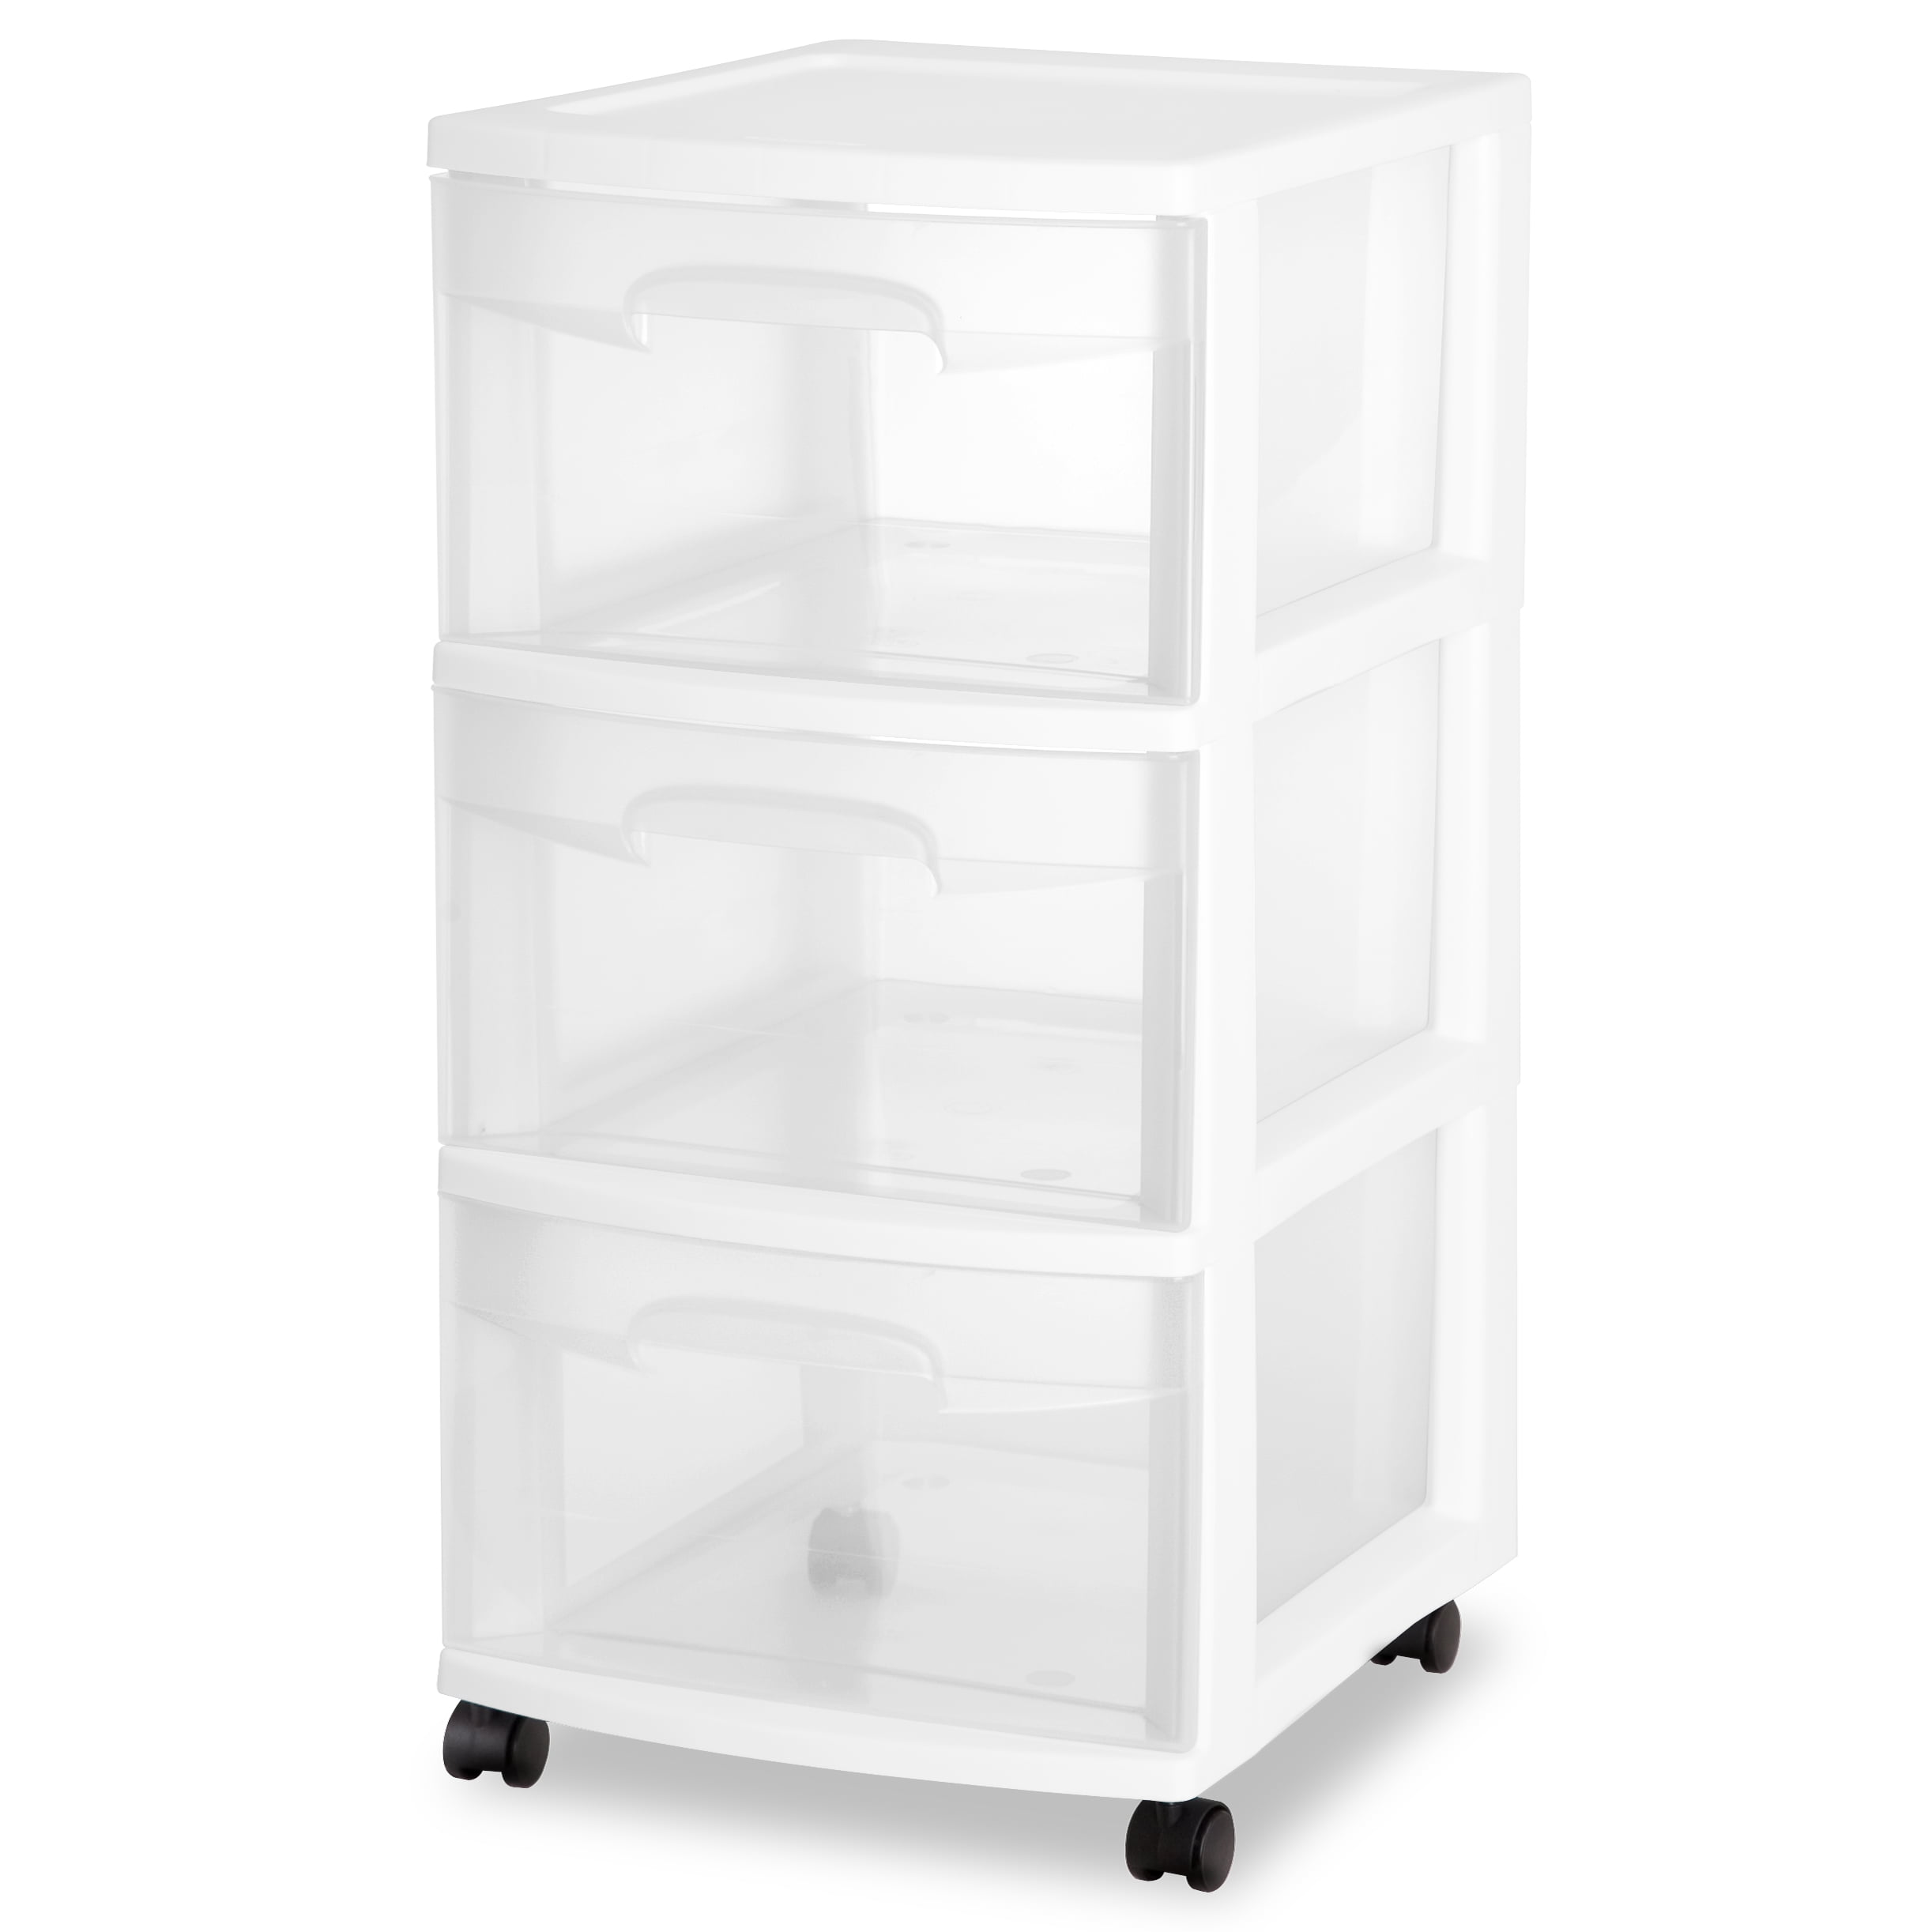 Sterilite 3 Drawer Cart, White with Clear Drawers, Adult